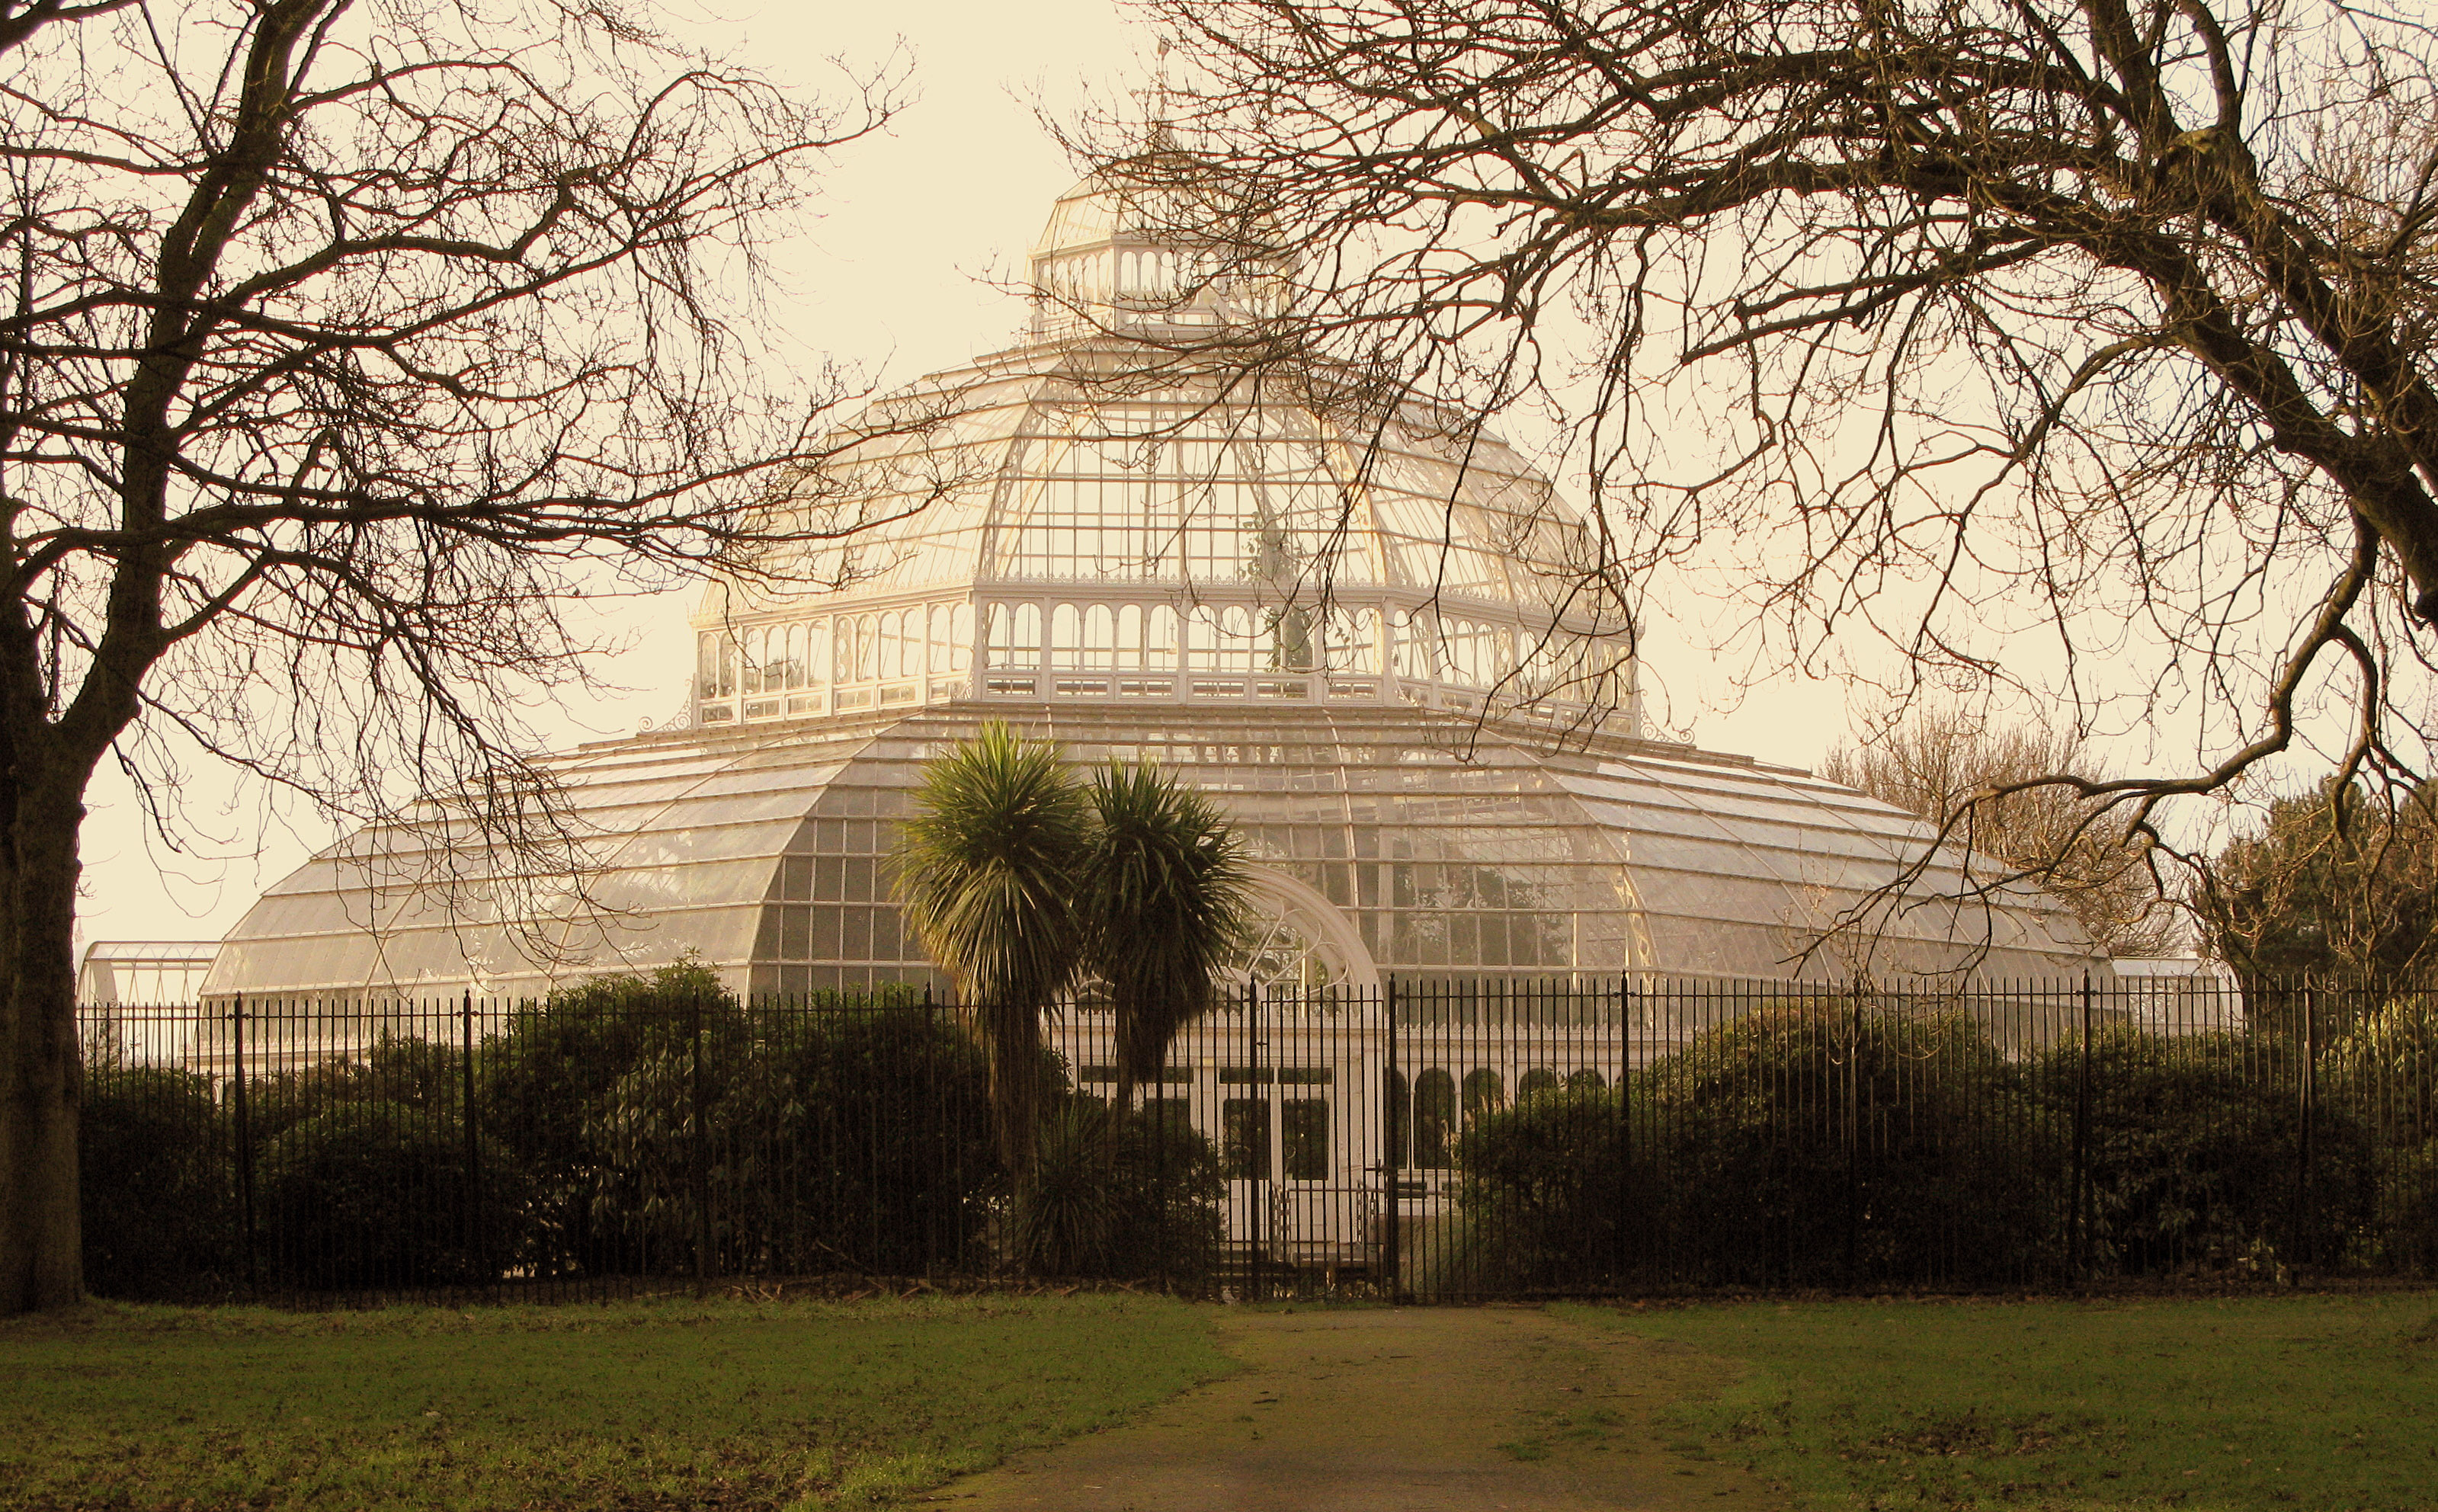 The Palm House In Sefton Park Liverpool, England image - Free stock photo - Public Domain photo - CC0 Images